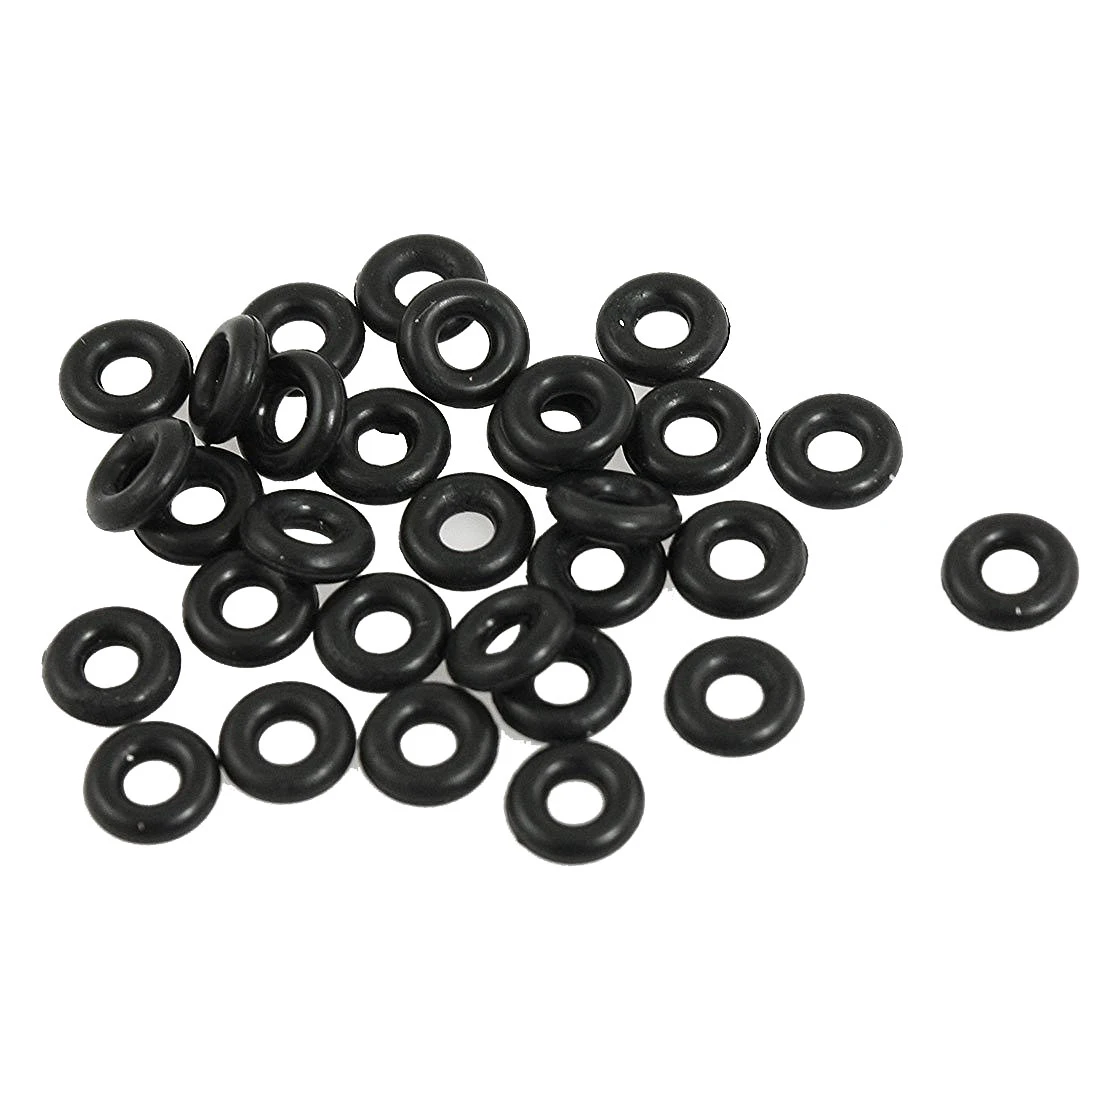 Hot sale 30 Pcs 2.5mm x 6.5mm x 2mm Rubber O Rings for Wacky Worm Fishing